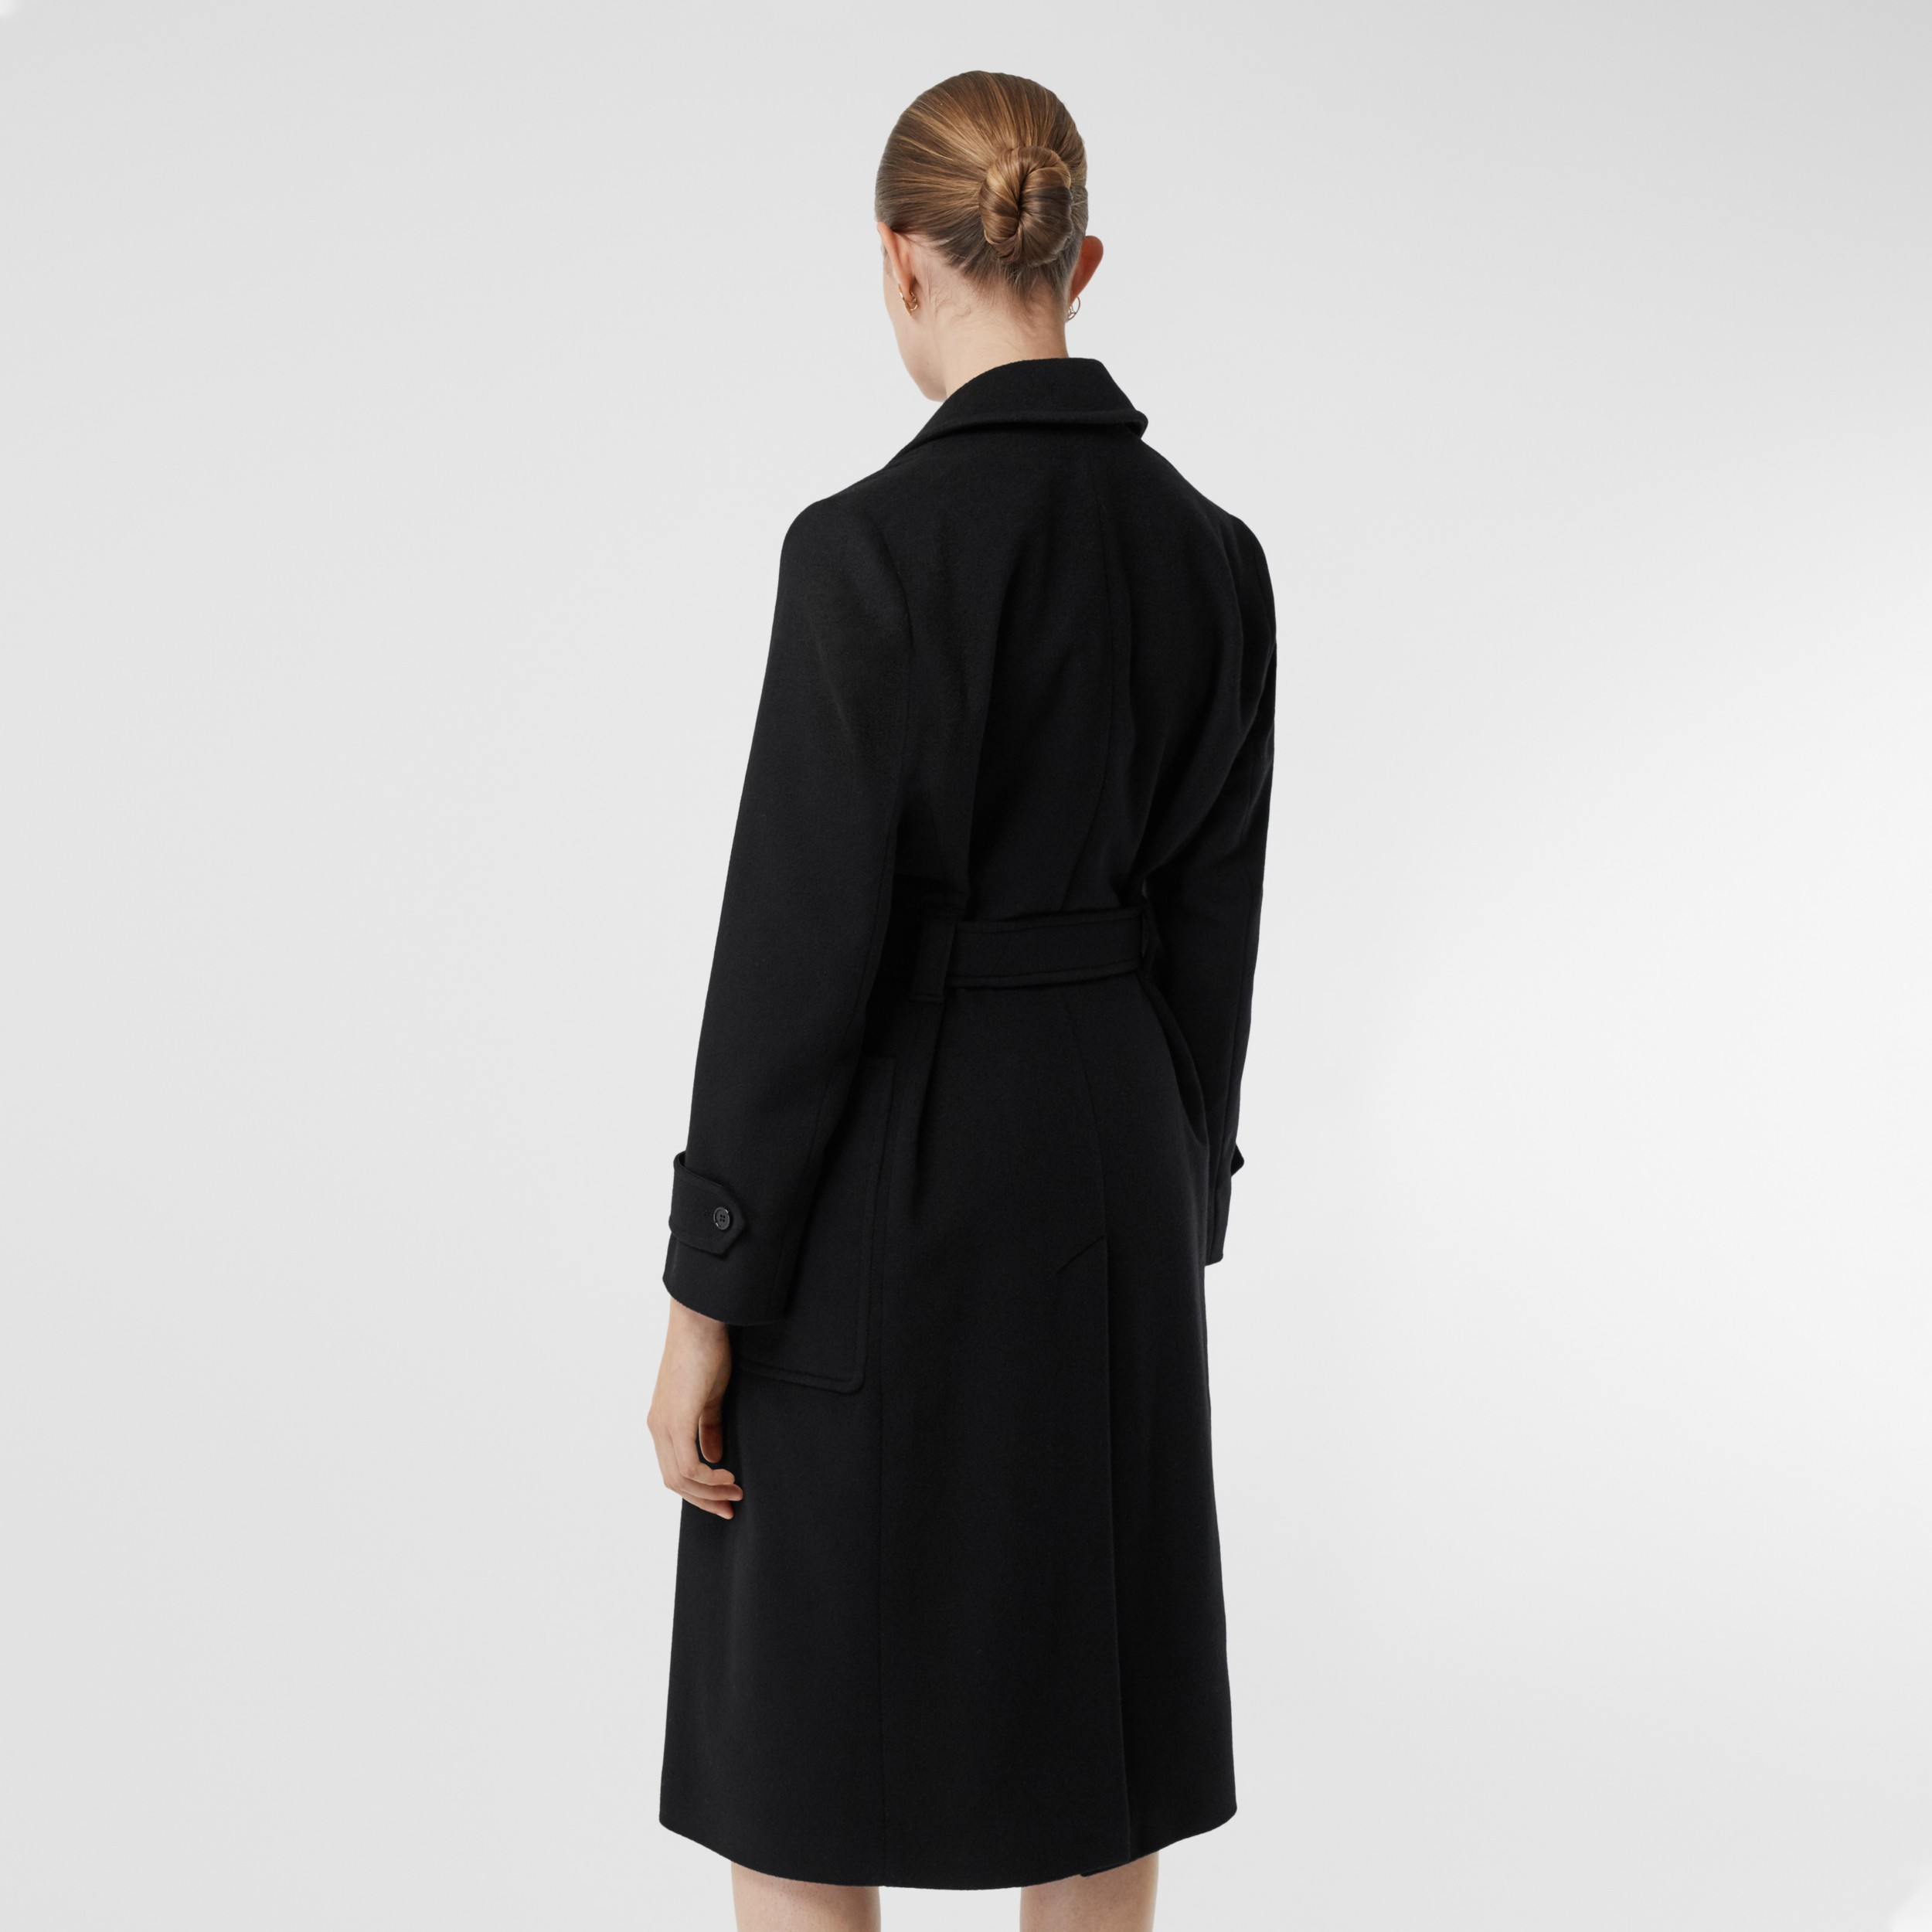 Cashmere Wrap Coat in Black - Women | Burberry United States